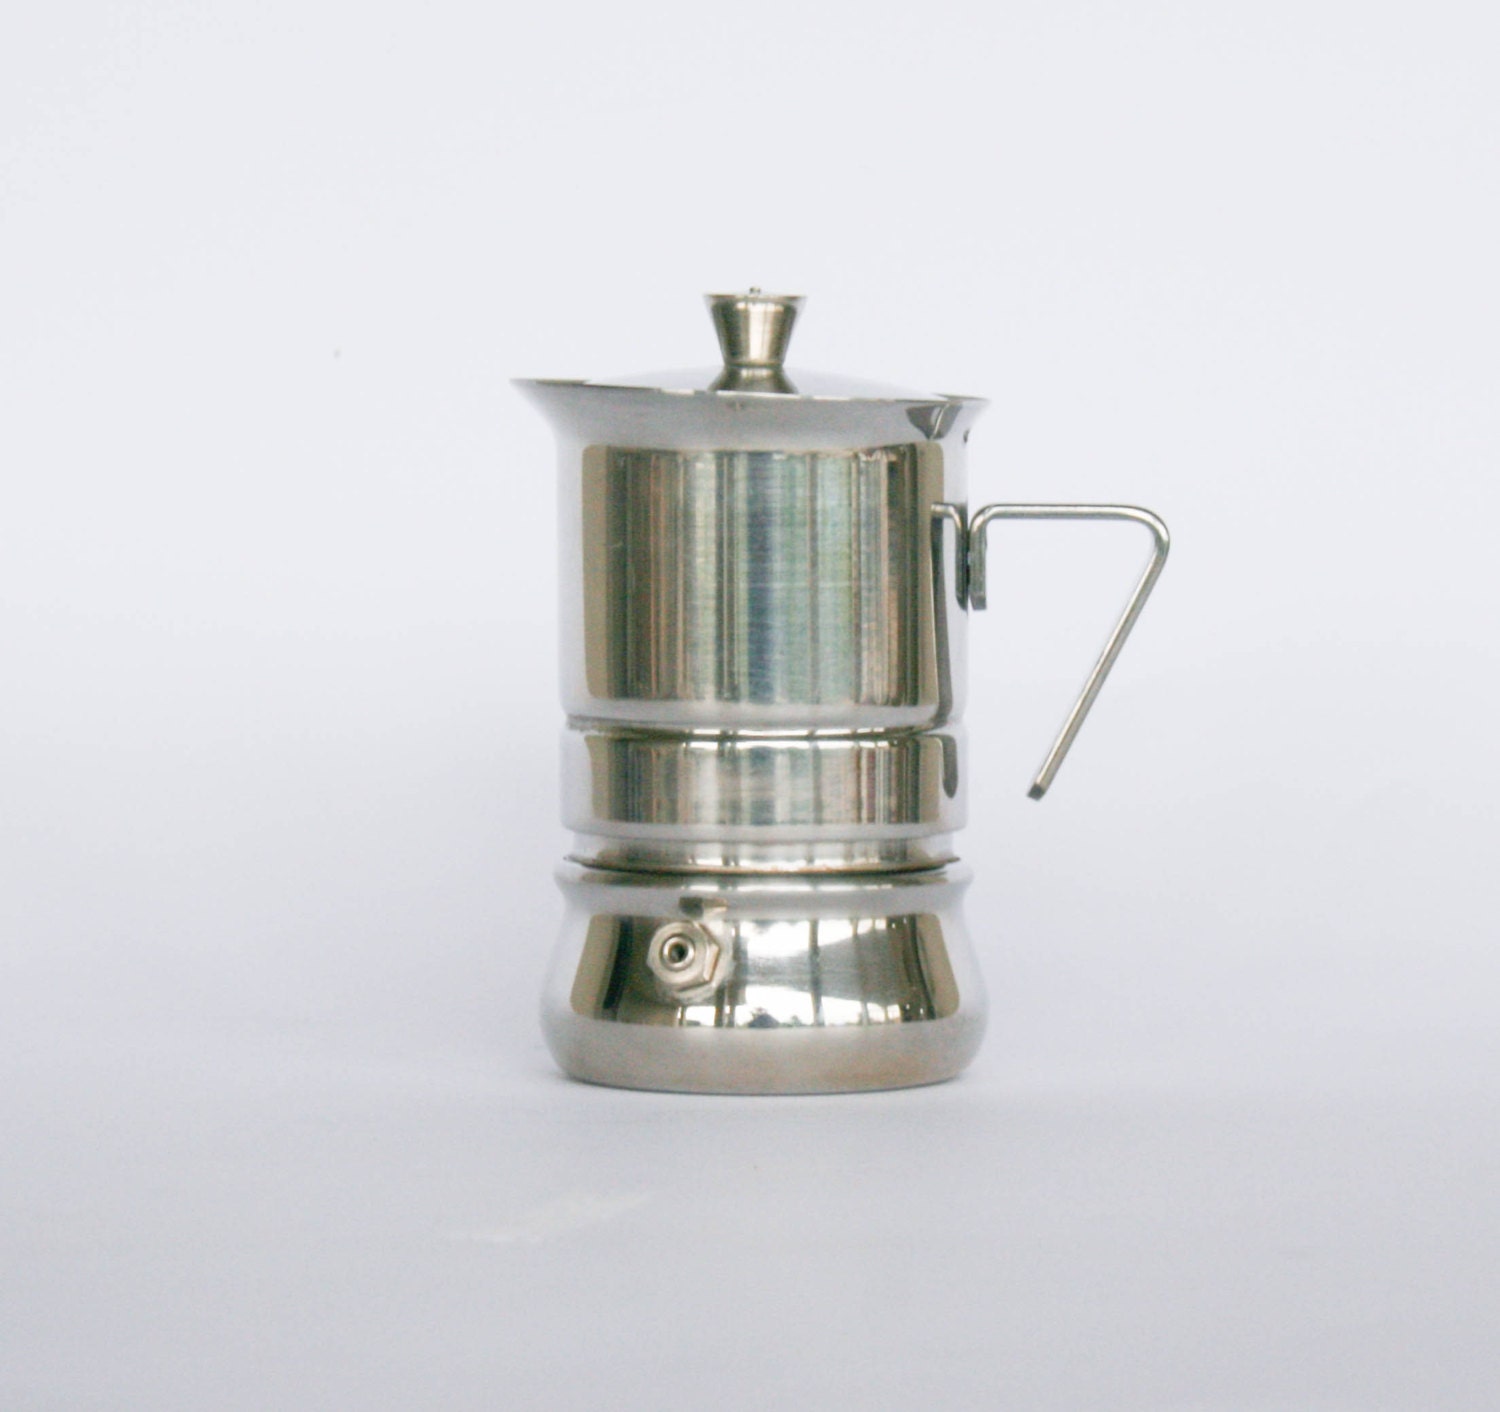 Vintage Stainless Steel Coffee Maker / Espresso Maker 1 cup